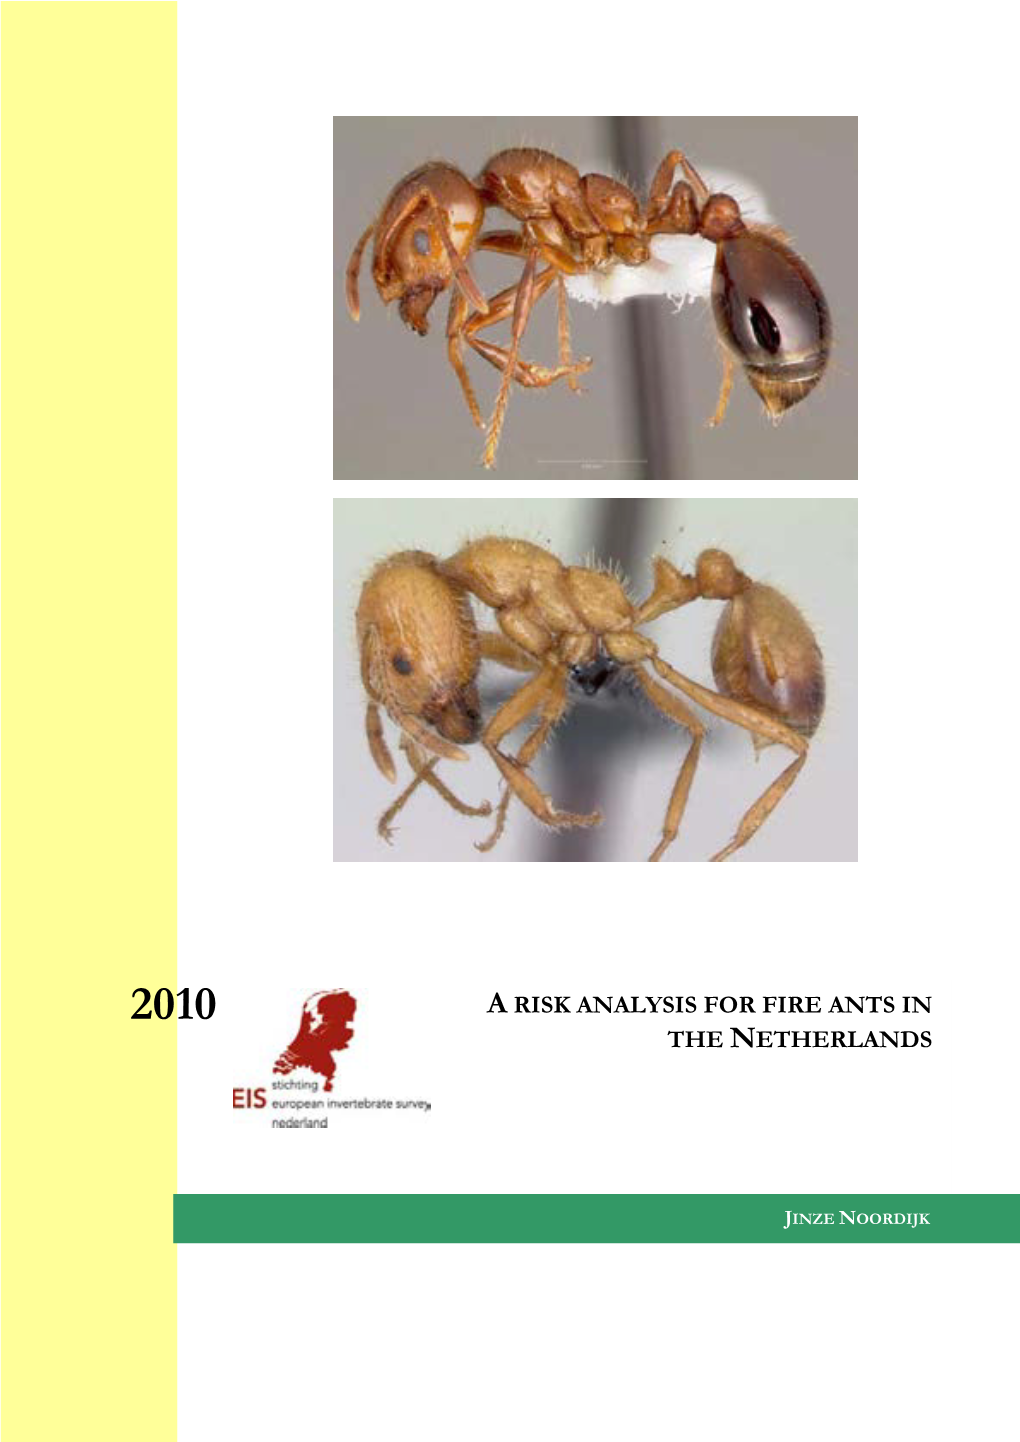 A Risk Analysis for Fire Ants in the Netherlands